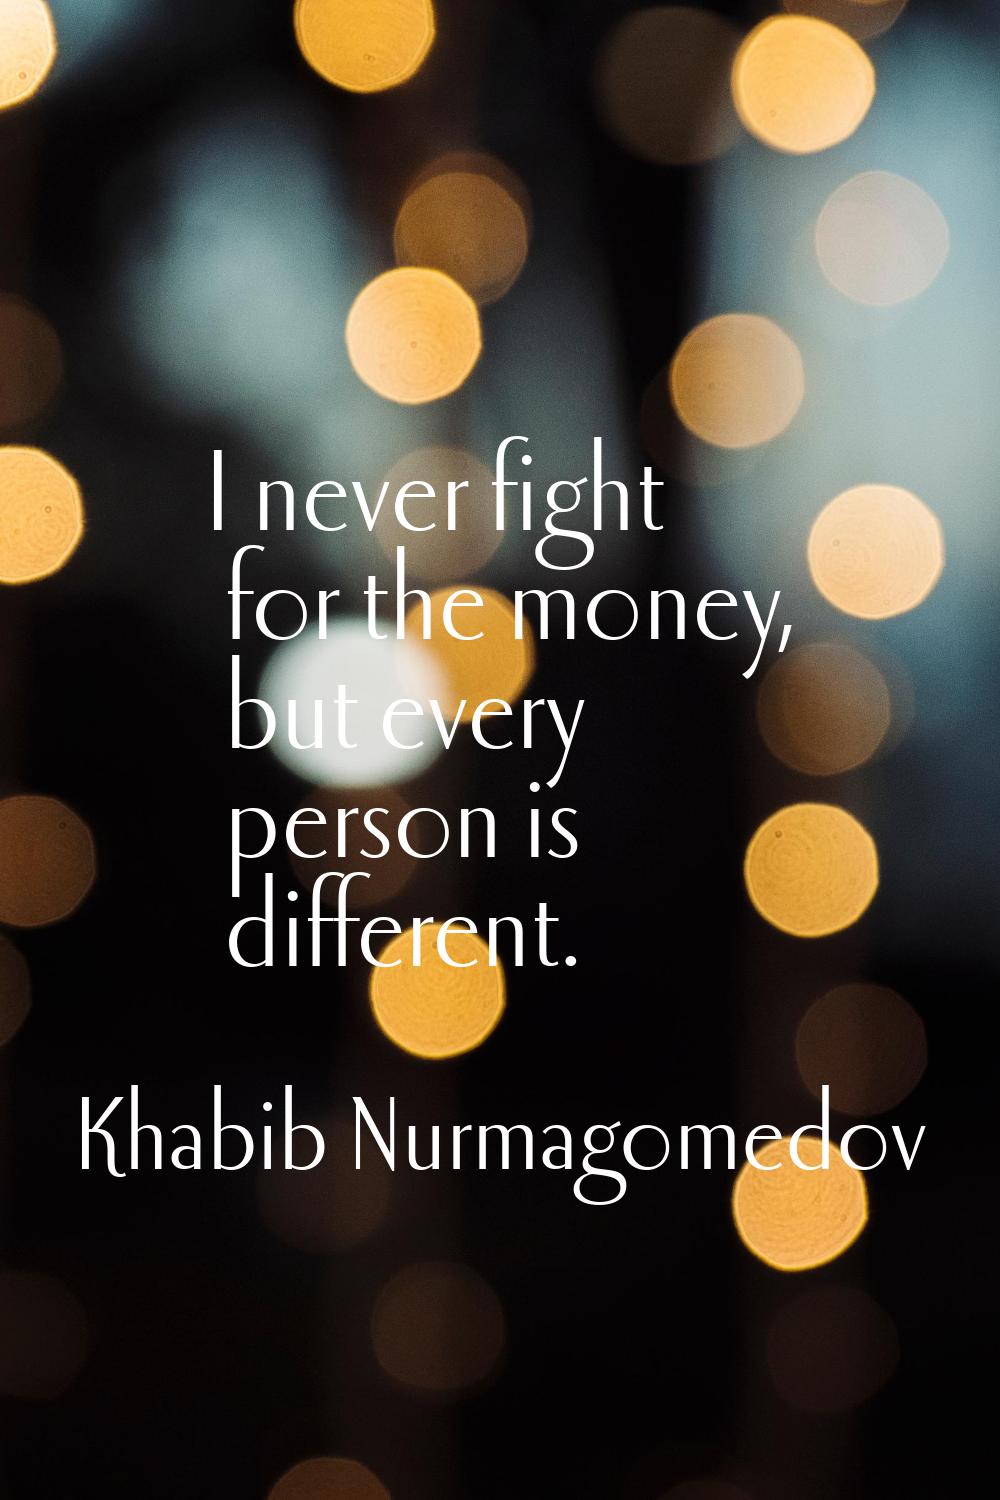 I never fight for the money, but every person is different.